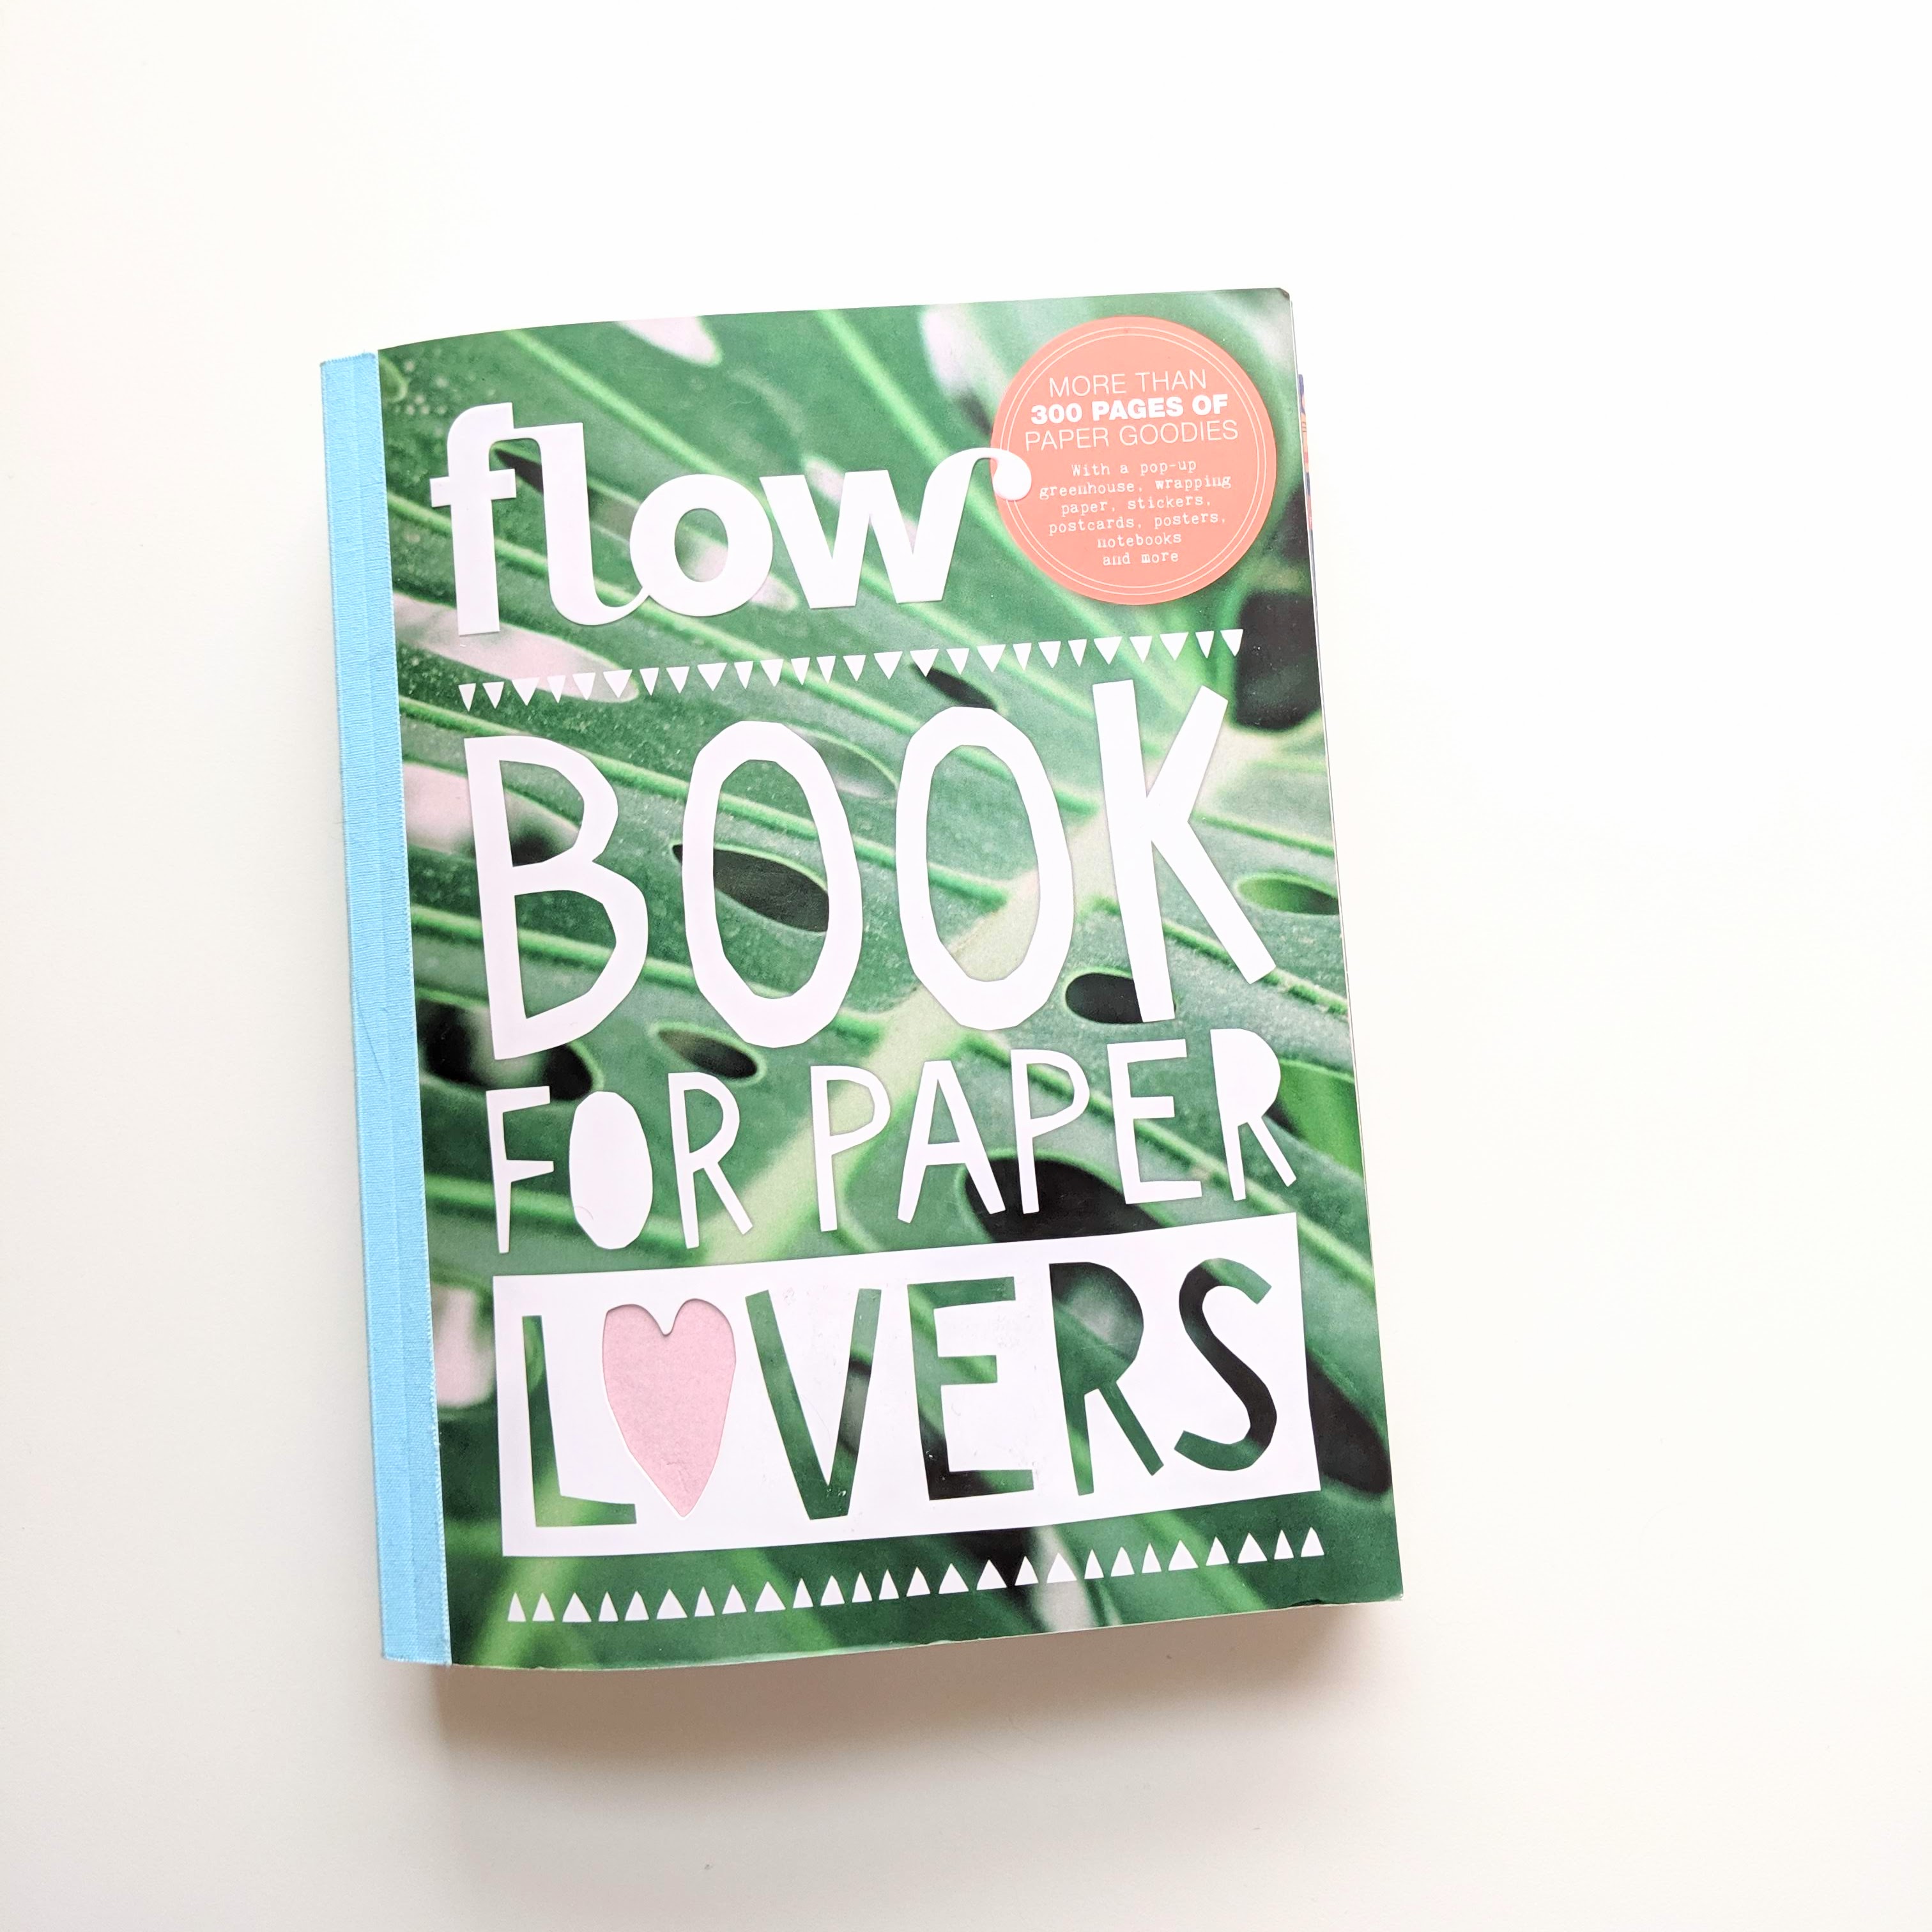 FLOW BOOK FOR PAPER LOVERS-Number 8-2020-TIME TO SLOW DOWN/PLAN/PLAY-Brand New 